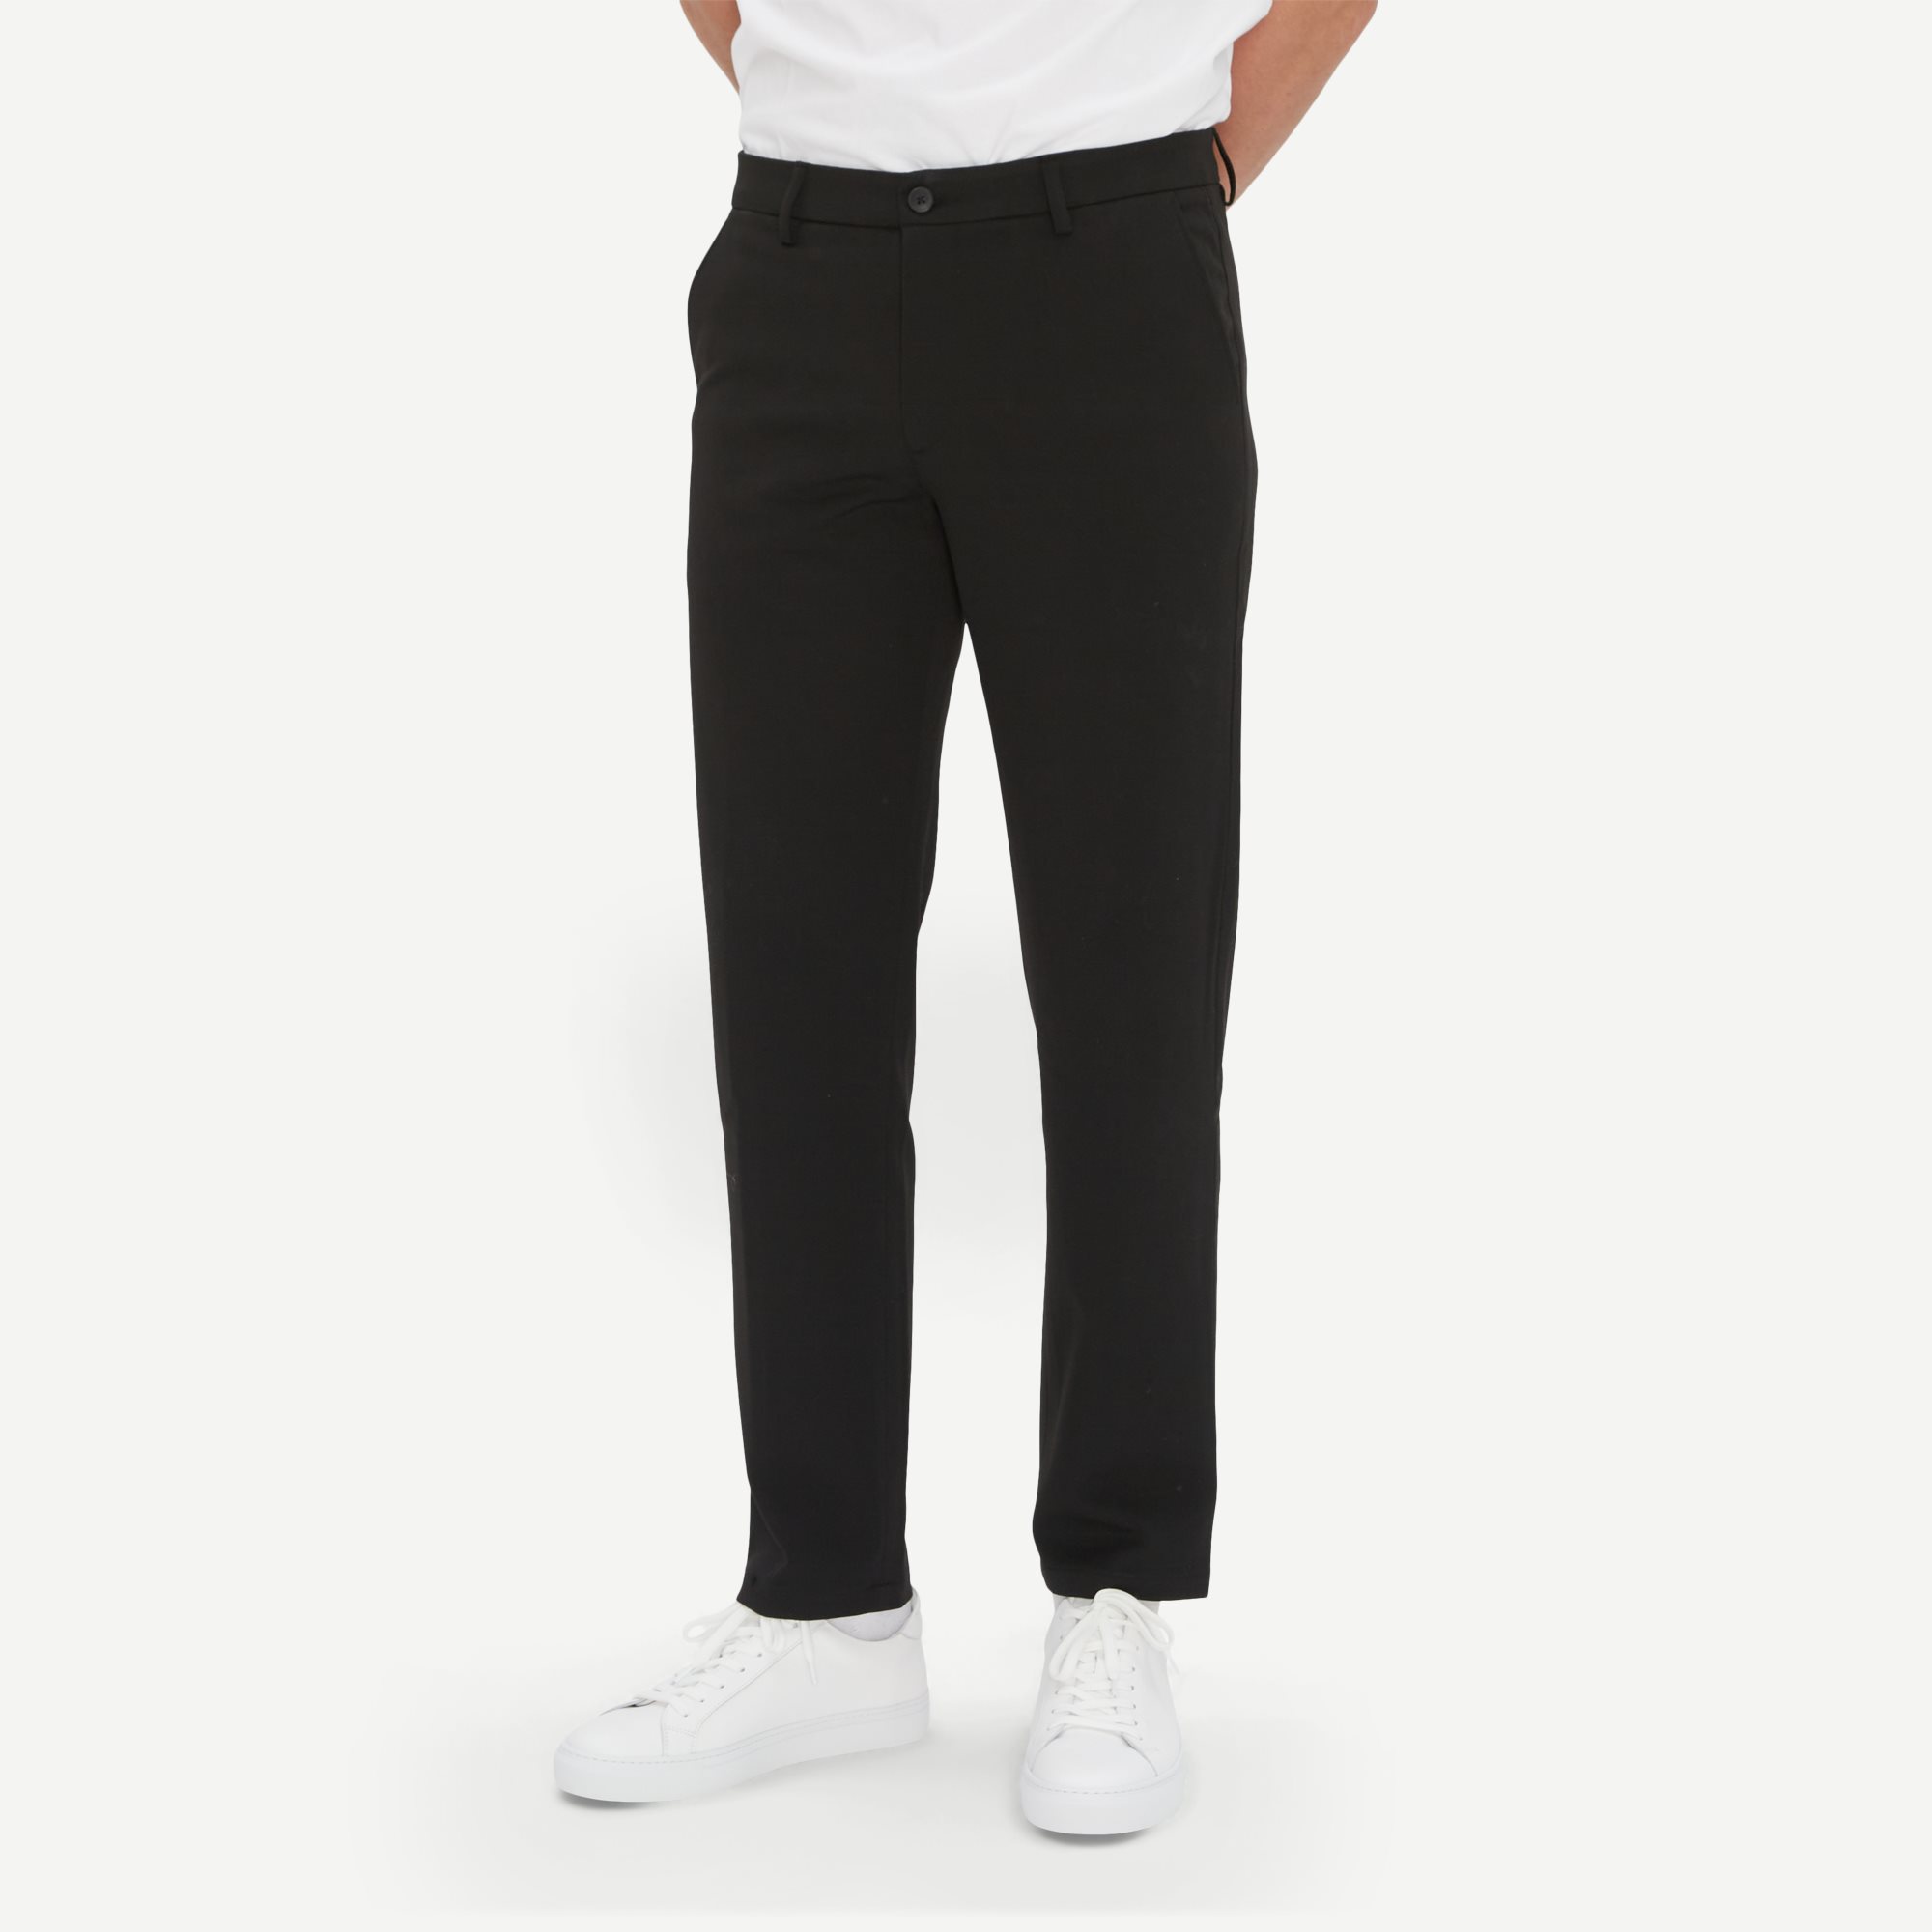 Como Suit Chinos - Trousers - Regular fit - Black